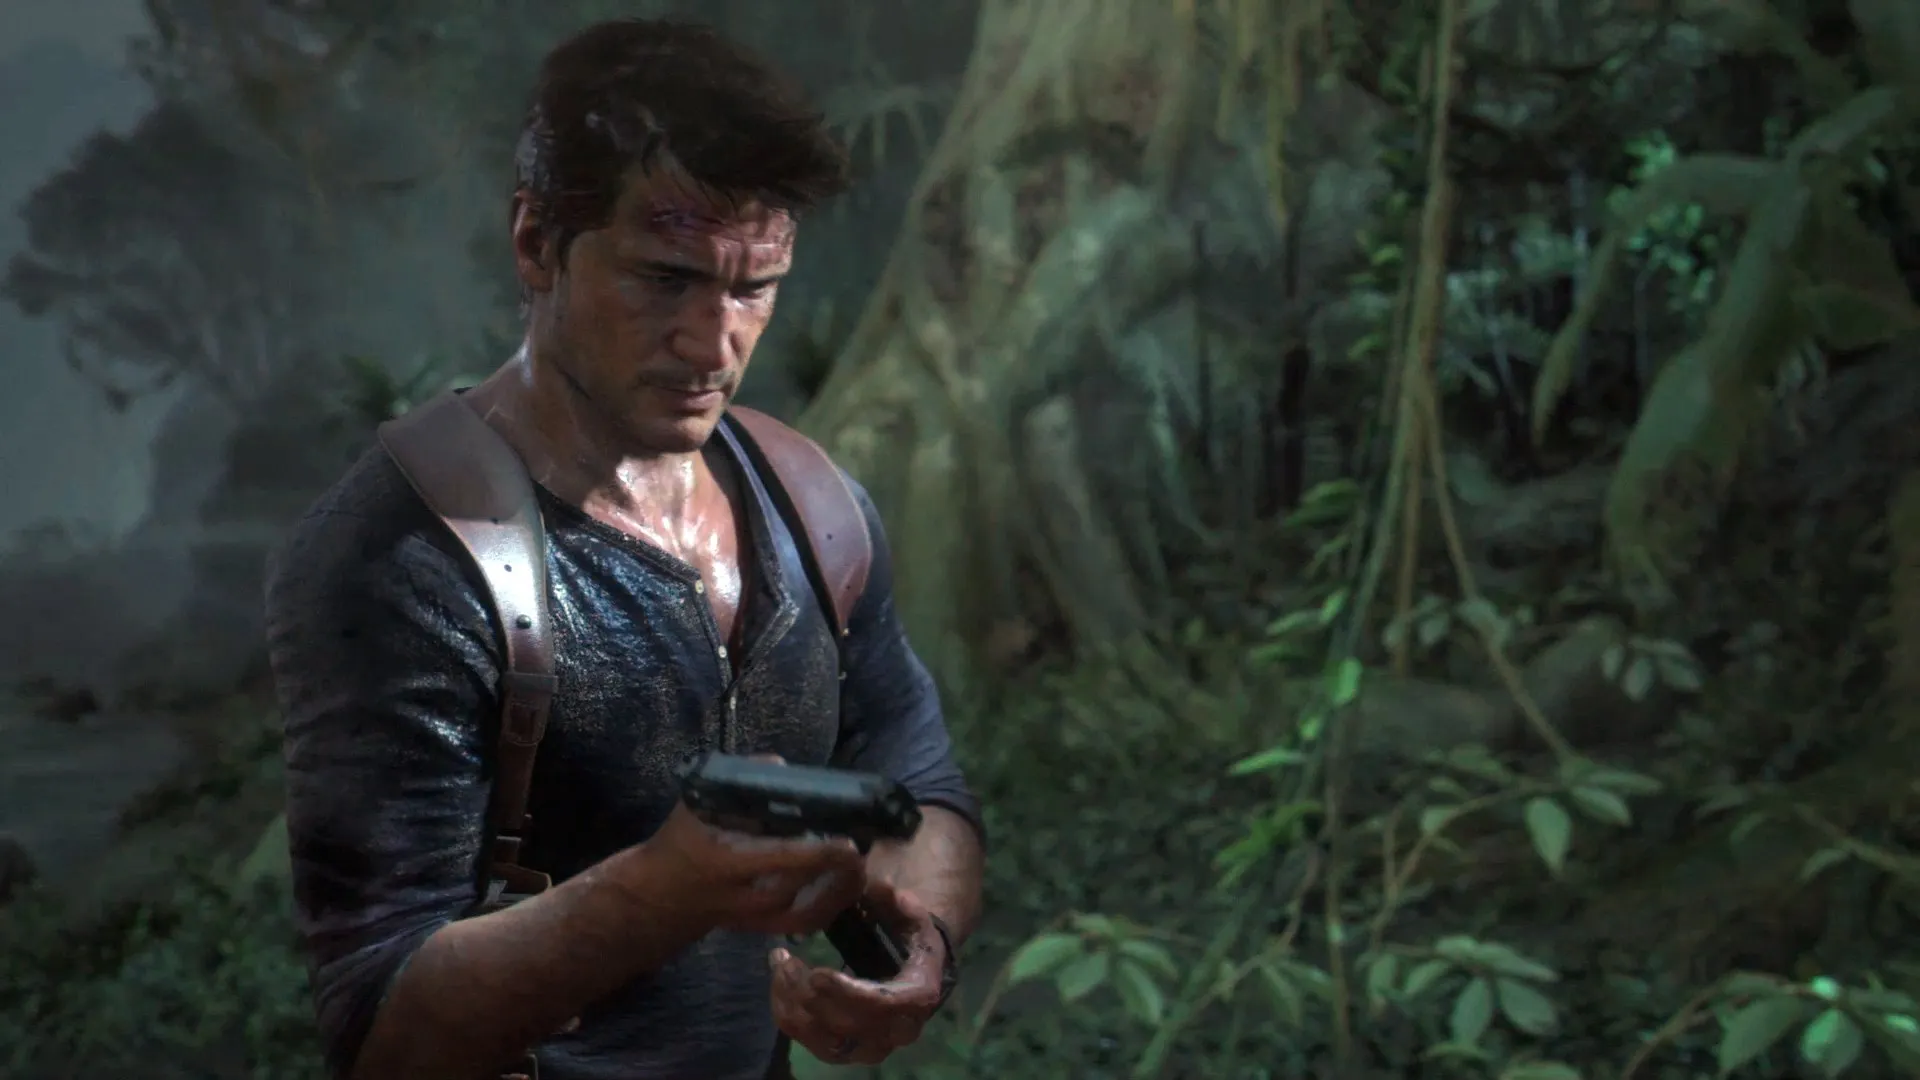 Sony - PS4 Exclusive Uncharted 4: A Thief's End to be Made